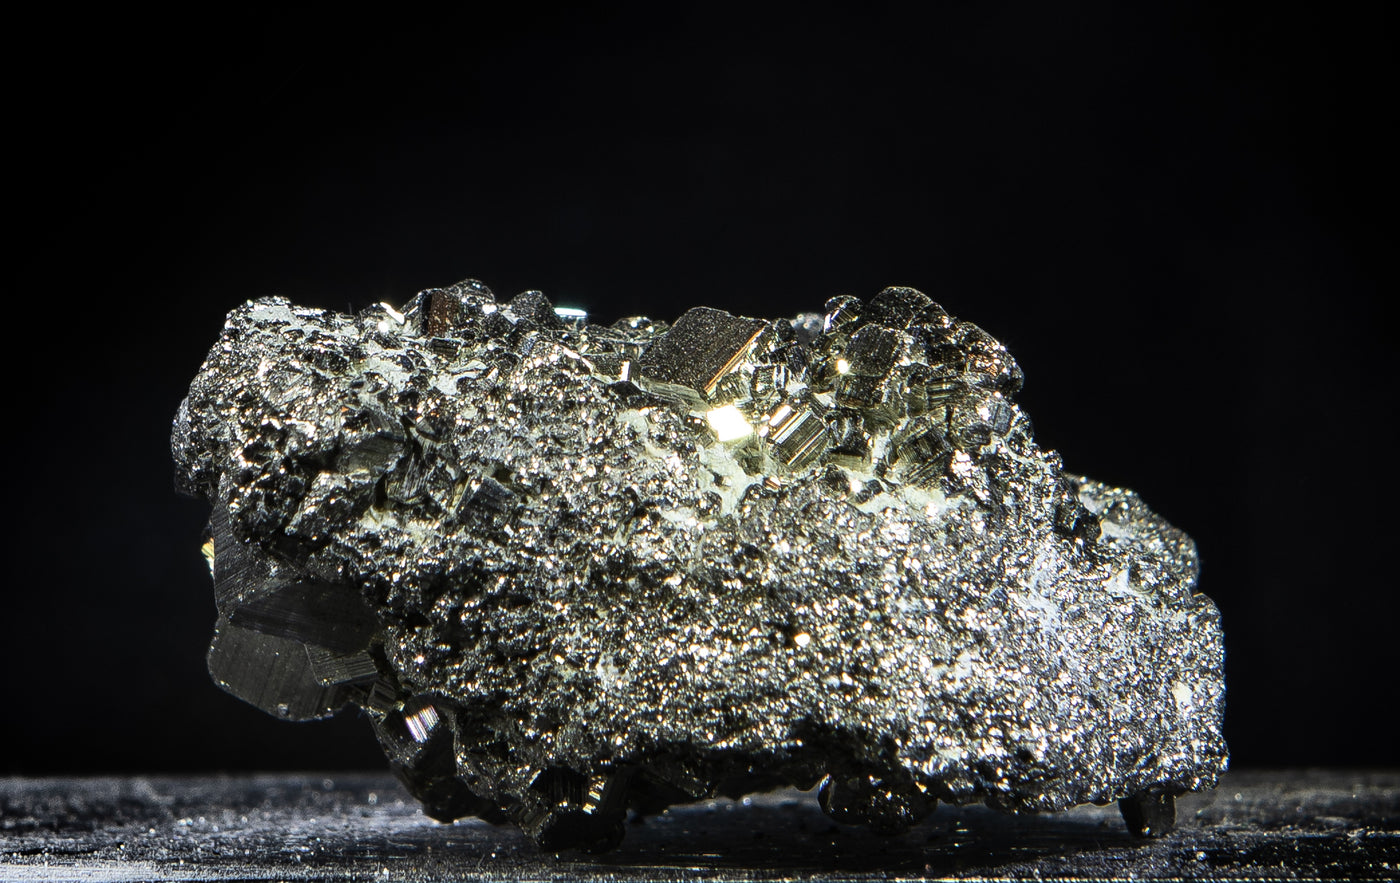 364 Pyrite Cluster 183 g 1.25 x 3 in